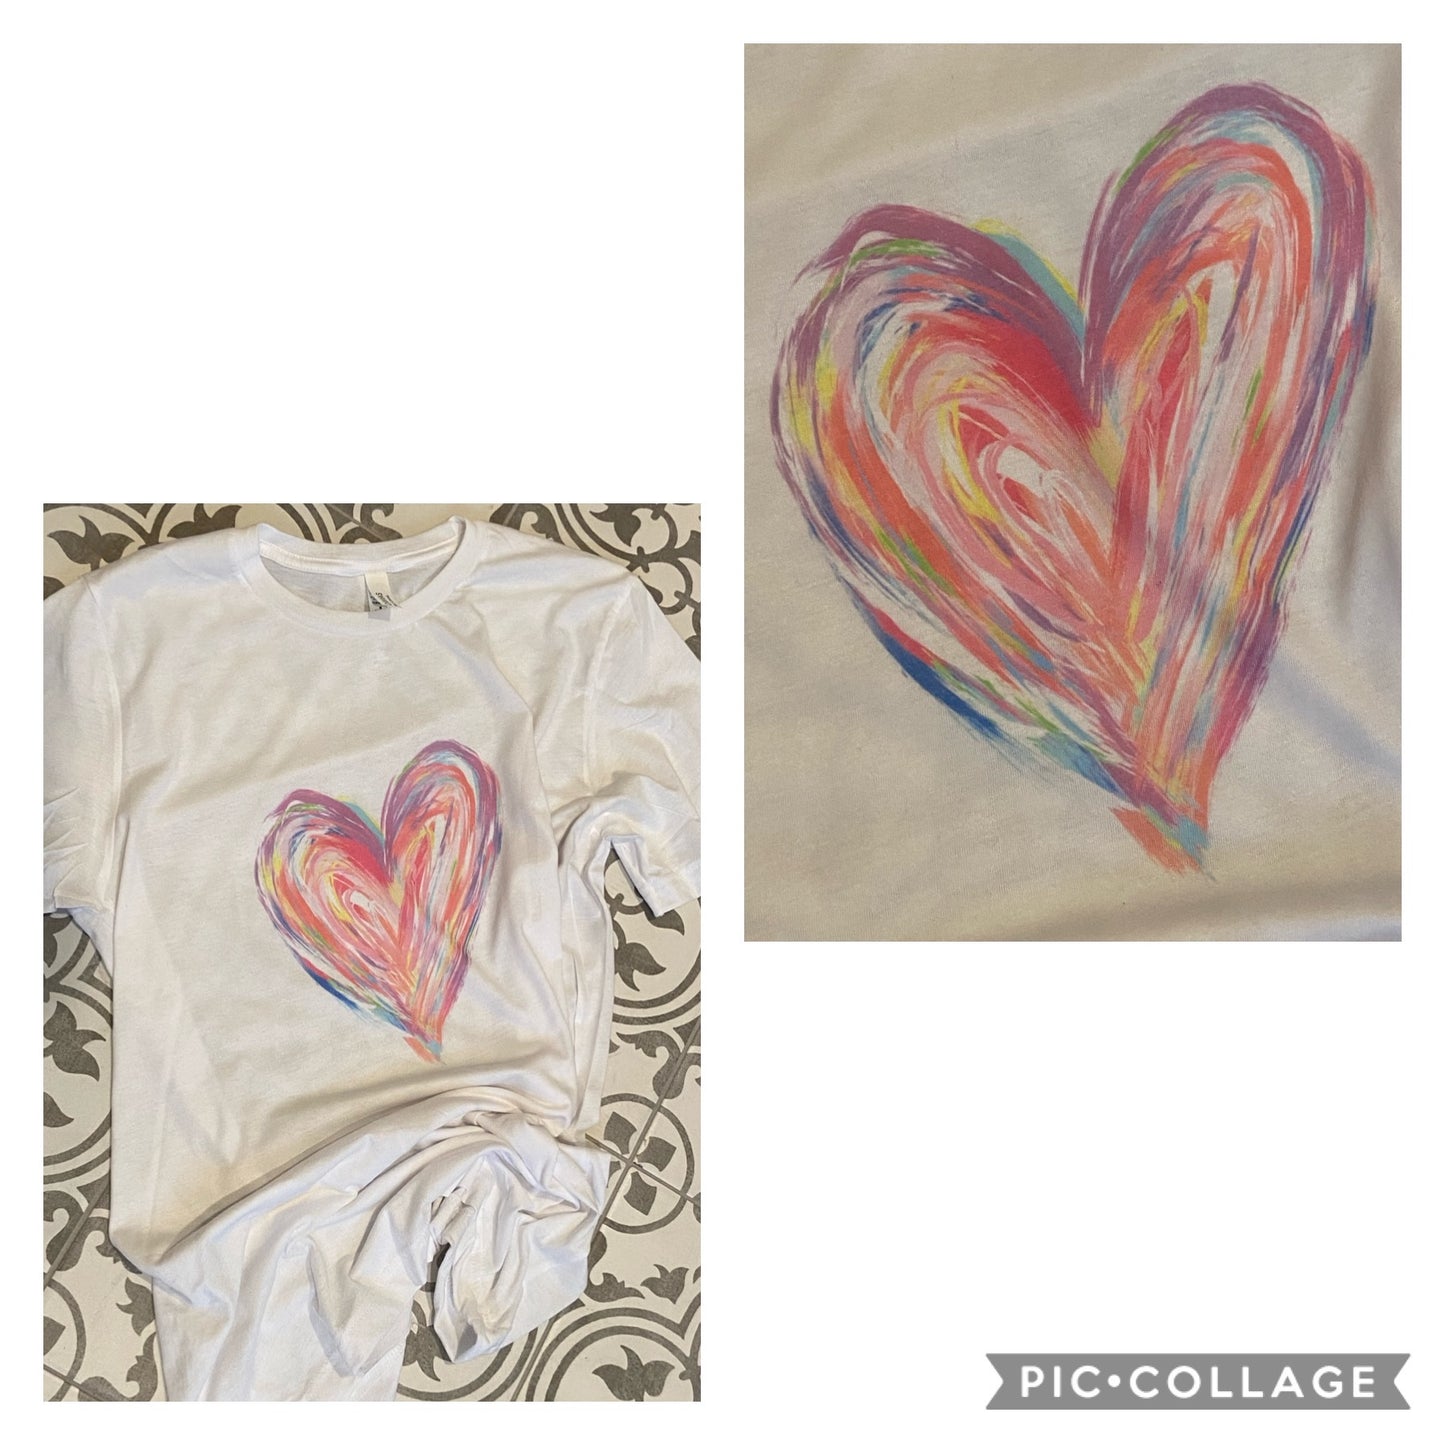 Watercolor Heart Pillow Cover